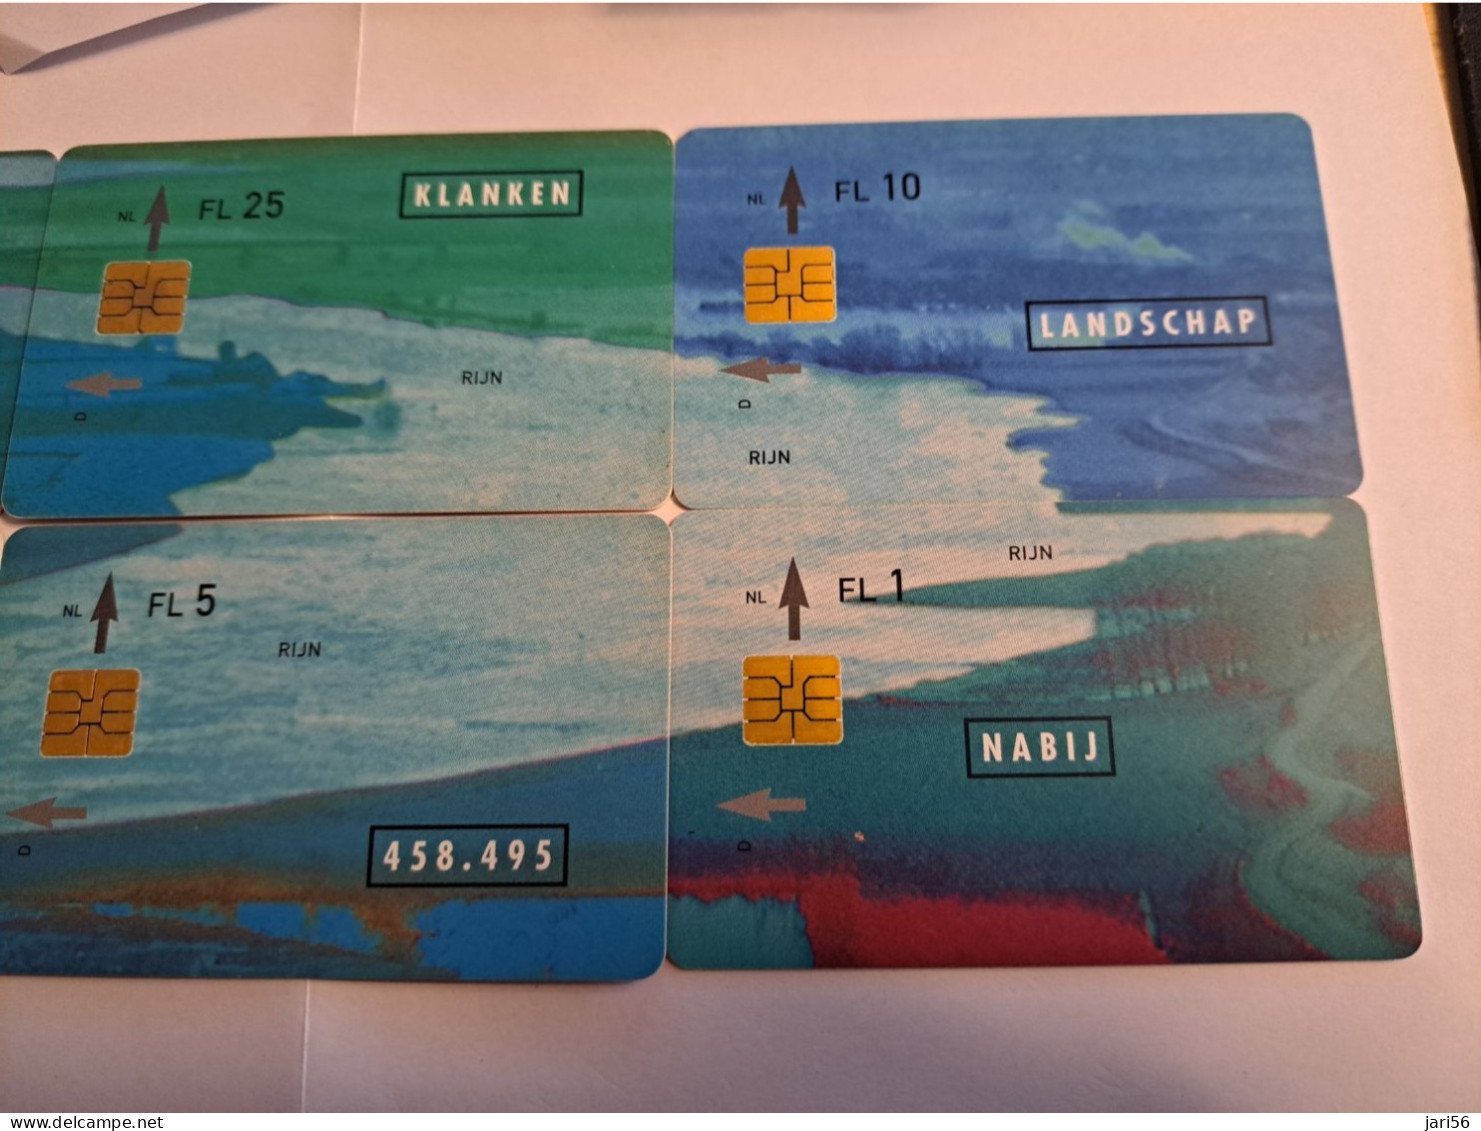 NETHERLANDS /SERIE /001/  CHIP CARD/ DUTCH/GERMAN ISSUE / PUZZLE RIVER RHINE AND LANDSCAPE 6 CARDS   /  MINT  ** 15937** - [3] Sim Cards, Prepaid & Refills